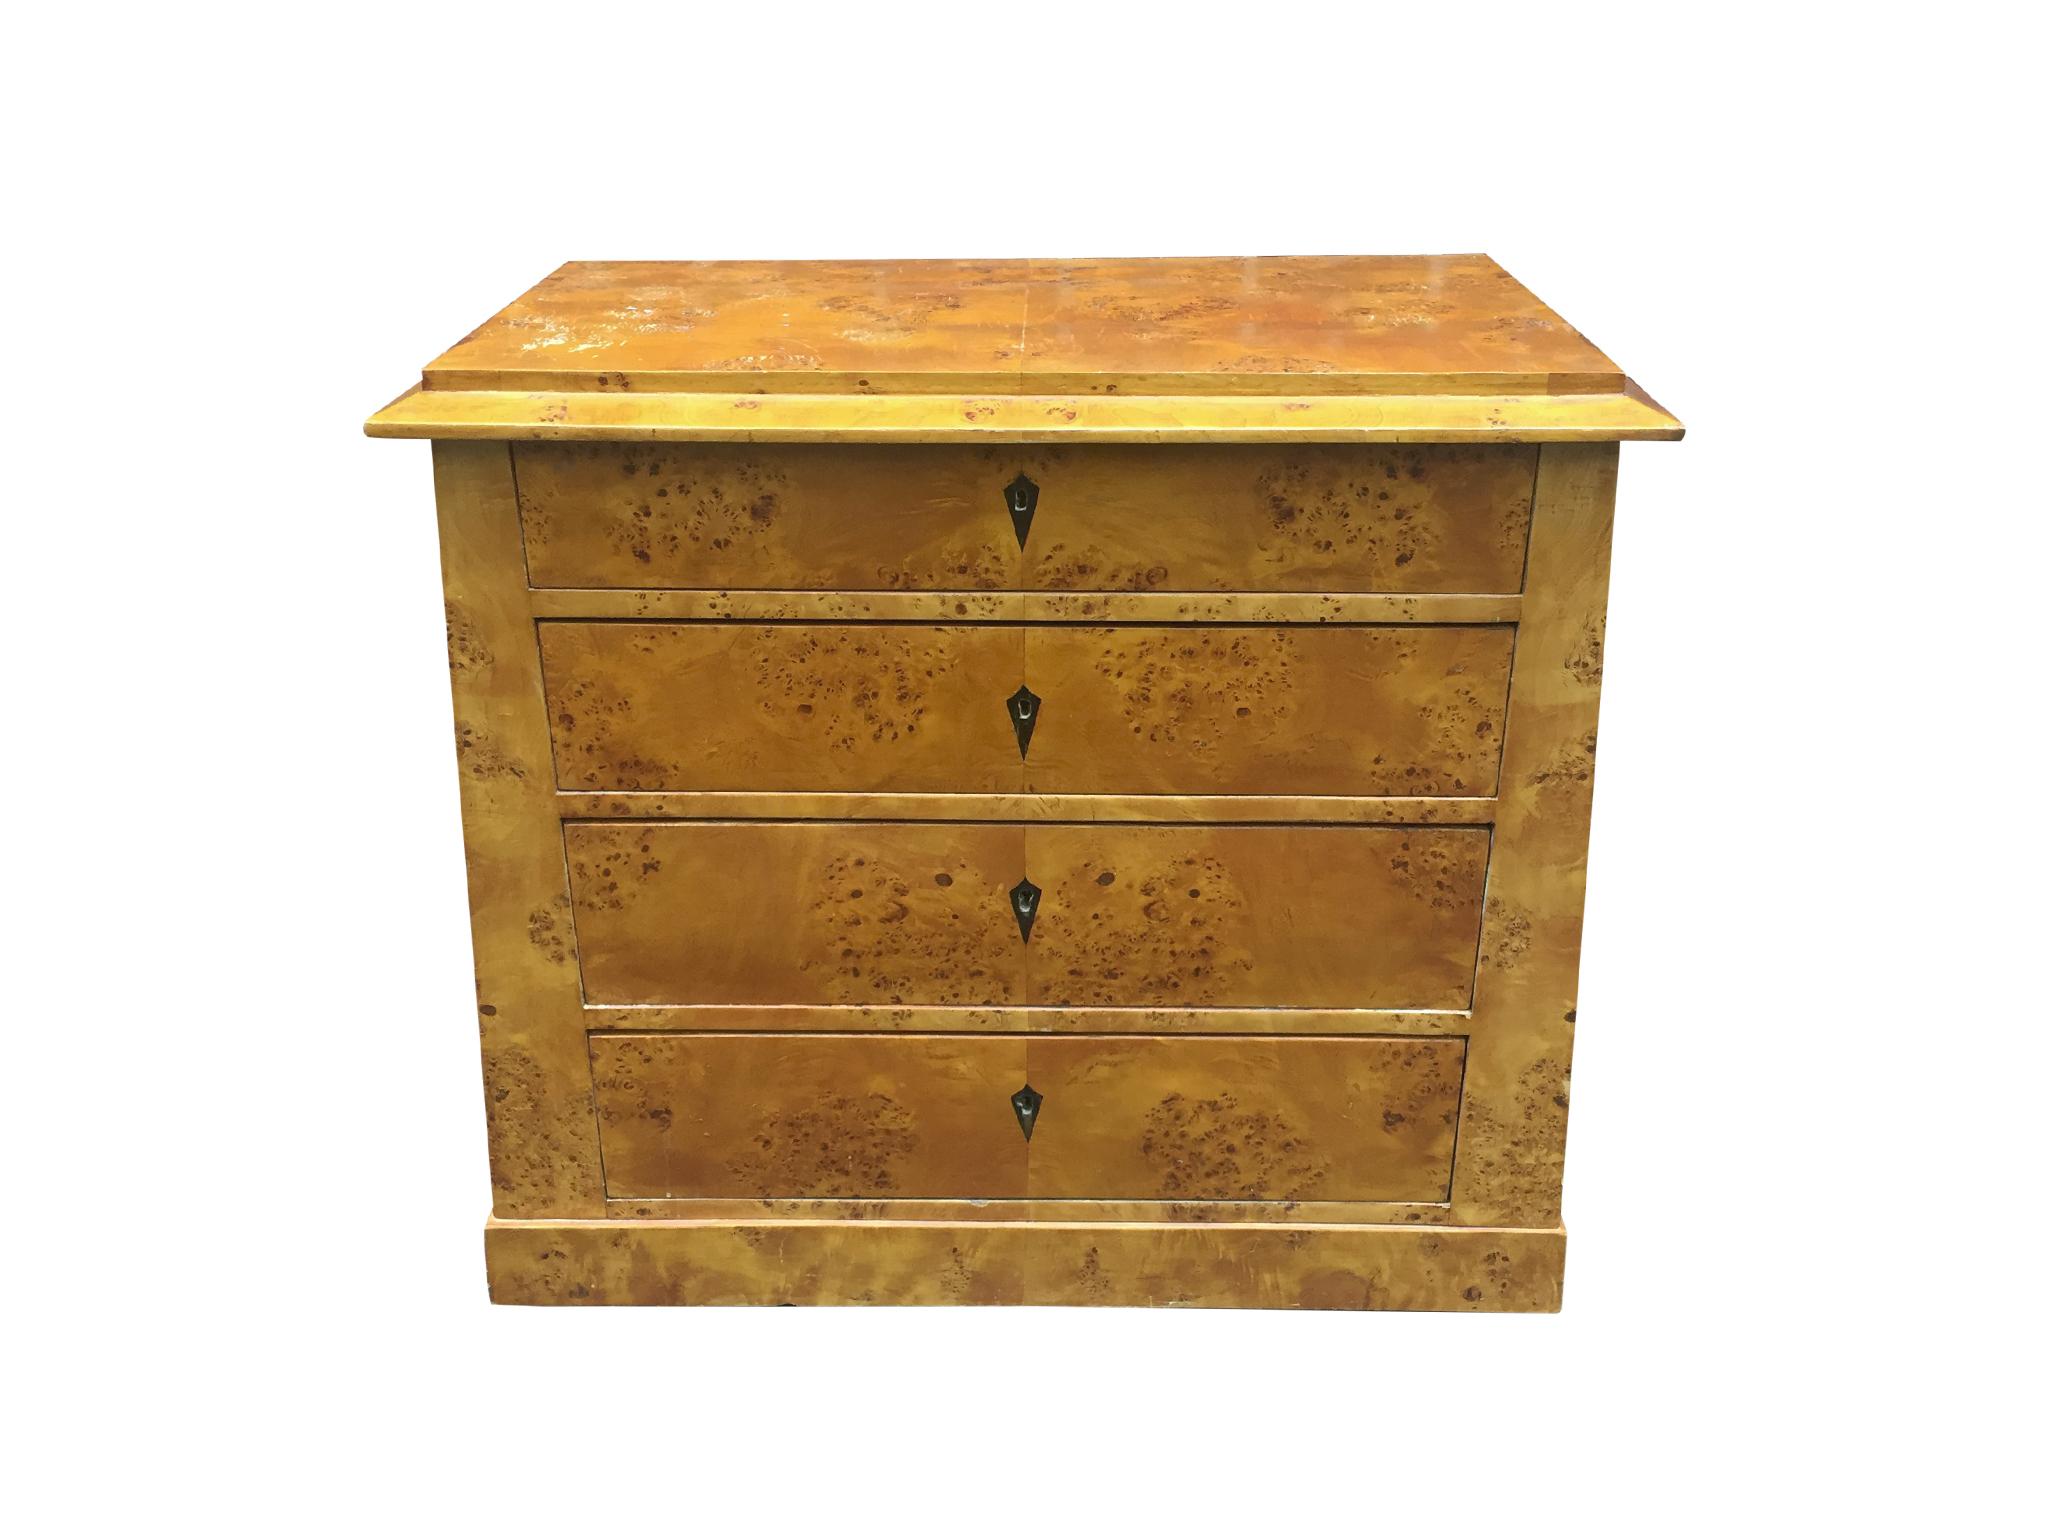 A beautiful Biedermeier chest of drawers or commode, 19th century. Expertly handcrafted with burl with a rich grain pattern. The wood is a warm, honey yellow-gold tone with a sheen. The arrangement of the chest is one of Classic symmetrical design.